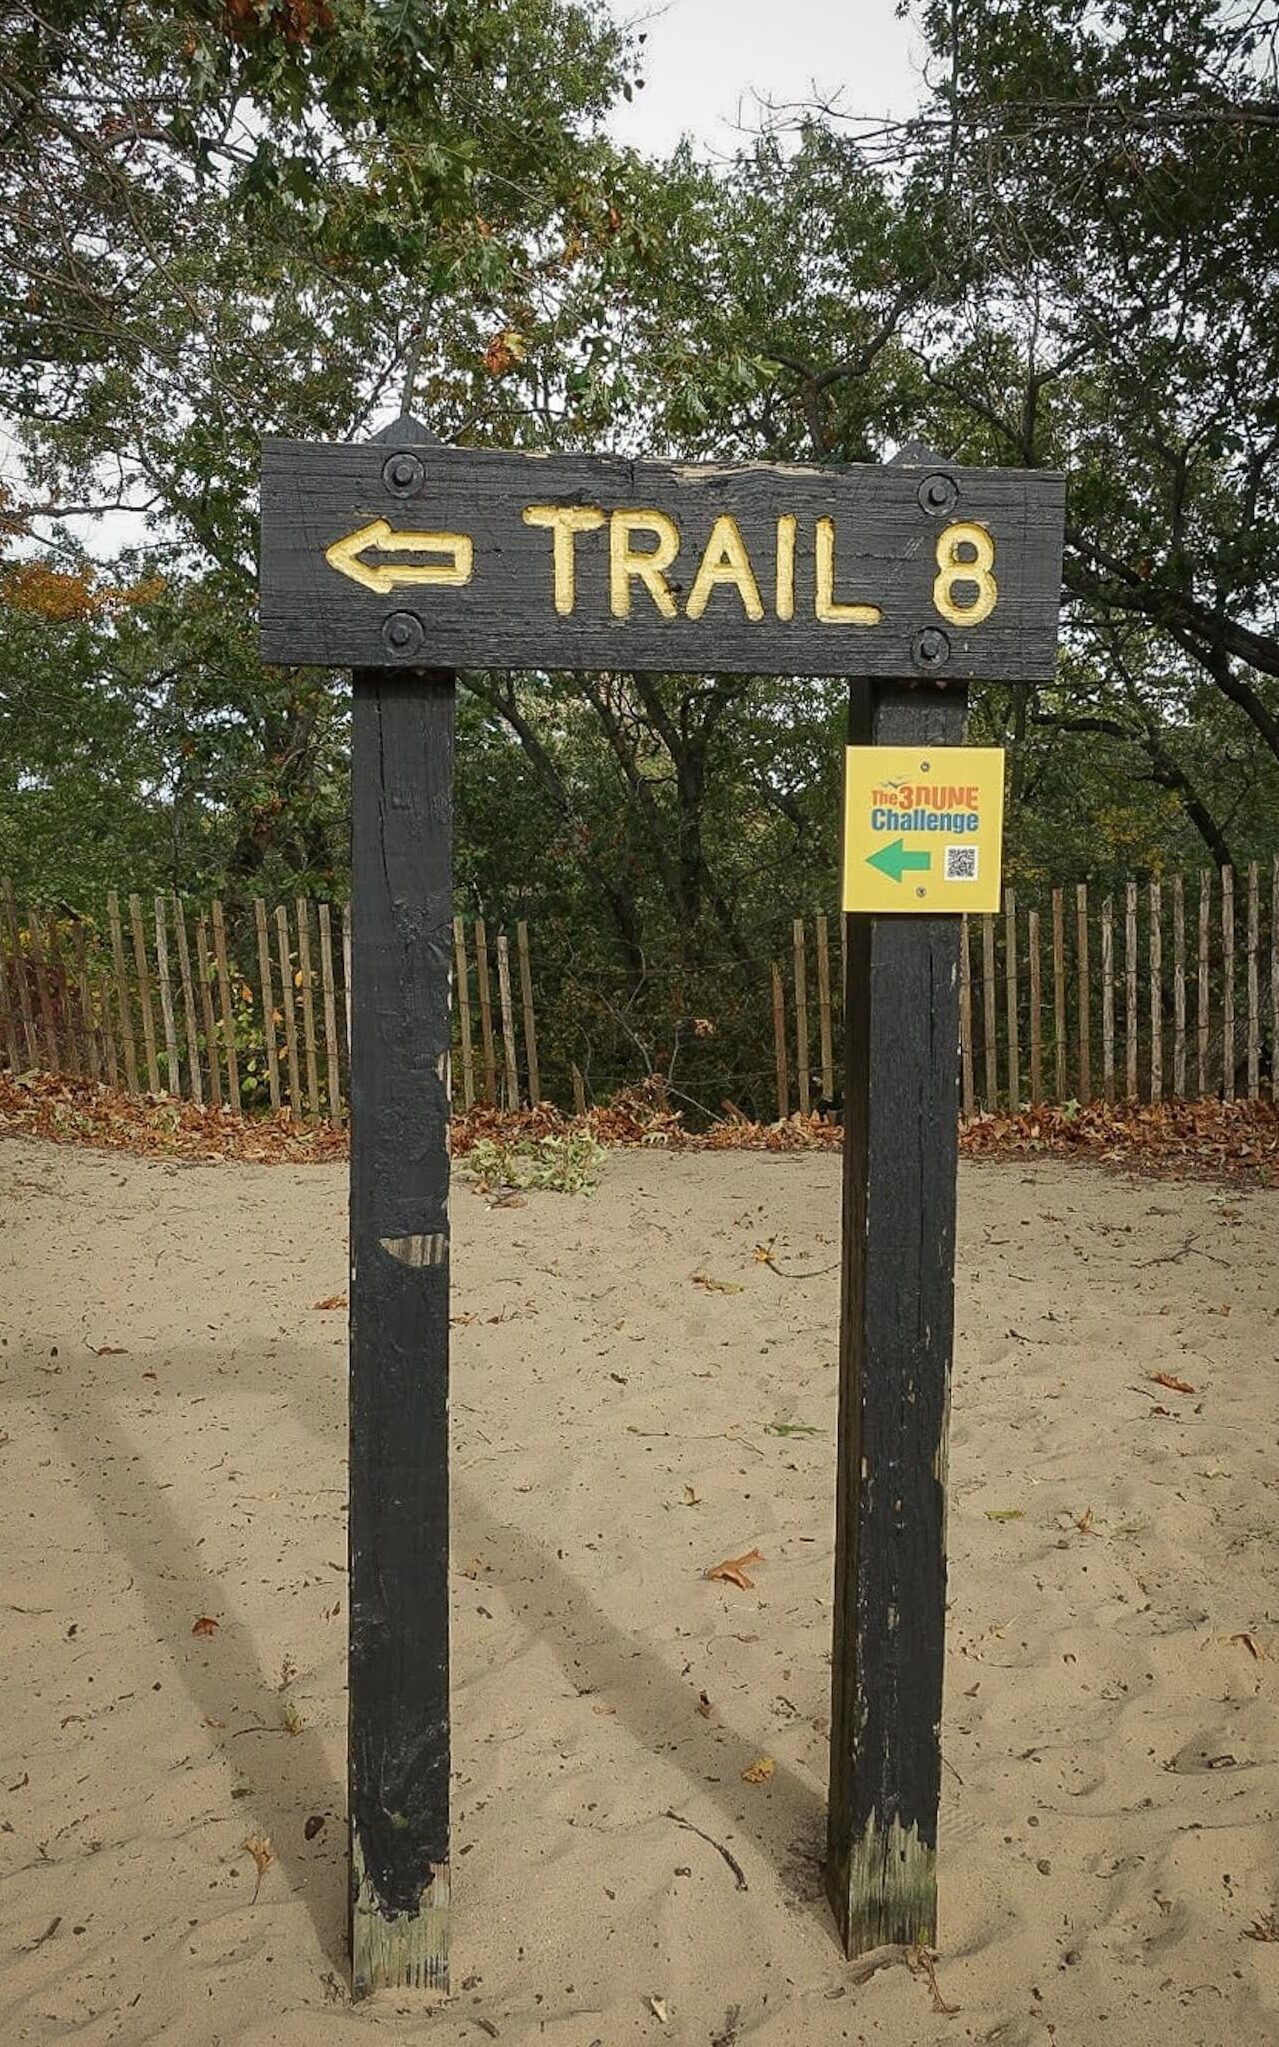 A trail marker that reads "Trail 8" and a yellow sign that says "the 3 Dune Challenge" with arrows pointing you in the right direction on the dune trail